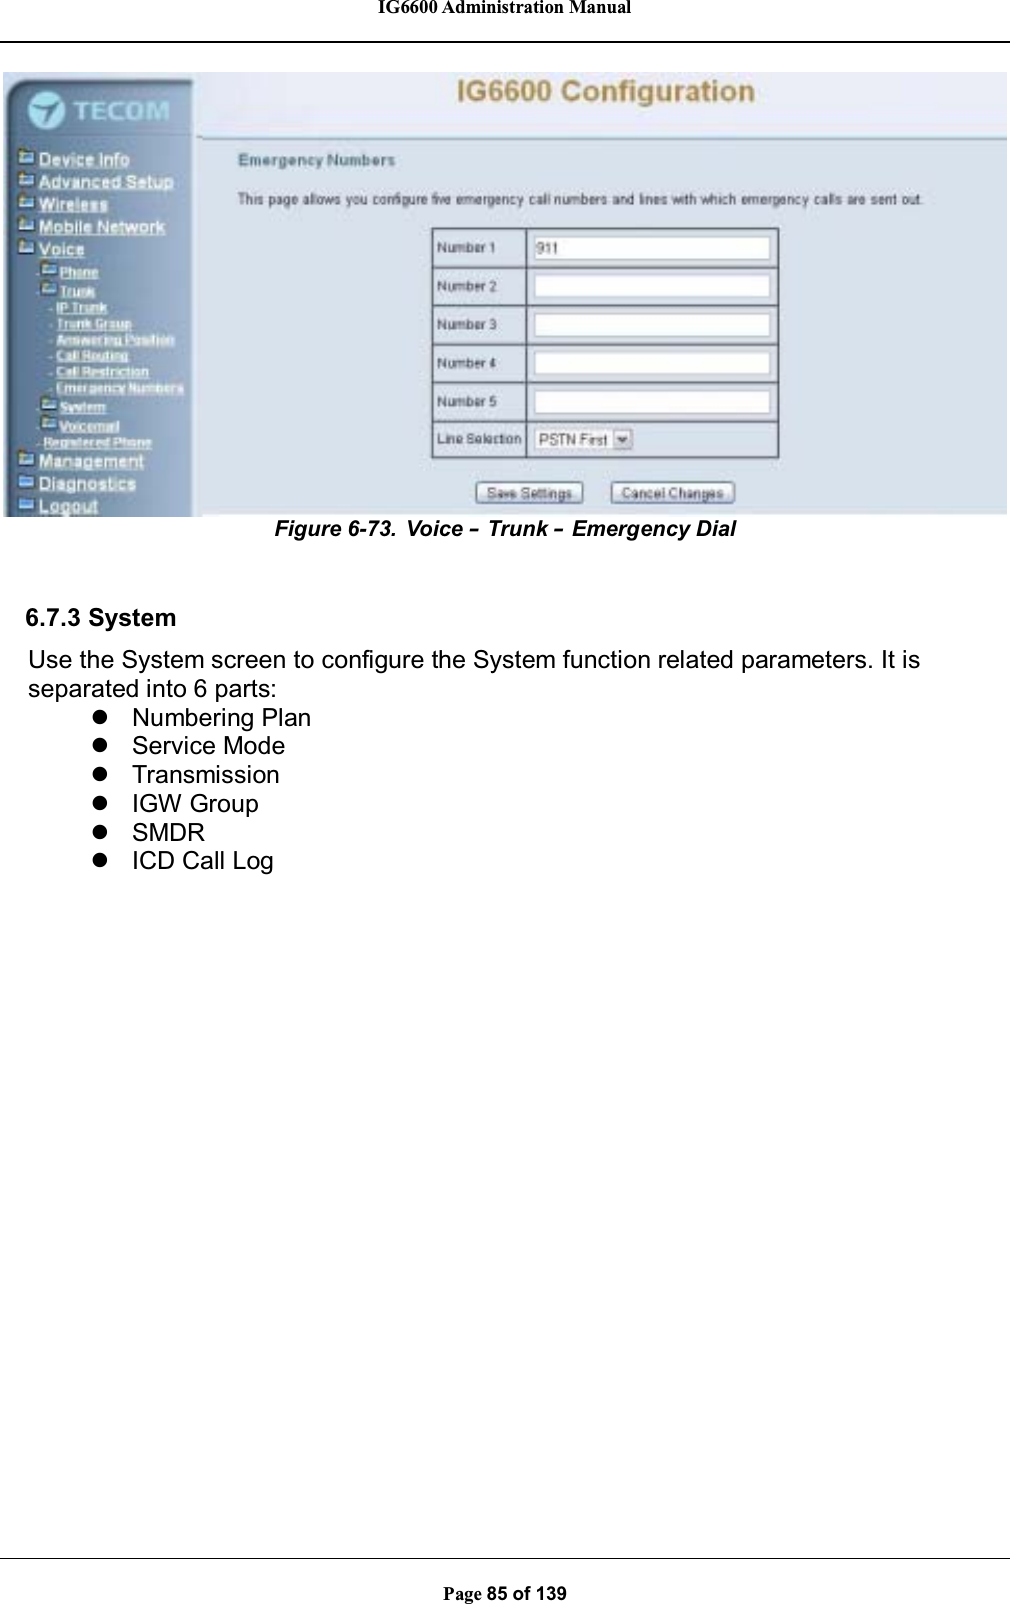 IG6600 Administration ManualPage 85 of 139Figure 6-73. Voice –Trunk –Emergency Dial6.7.3 SystemUse the System screen to configure the System function related parameters. It isseparated into 6 parts:zNumbering PlanzService ModezTransmissionzIGW GroupzSMDRzICD Call Log